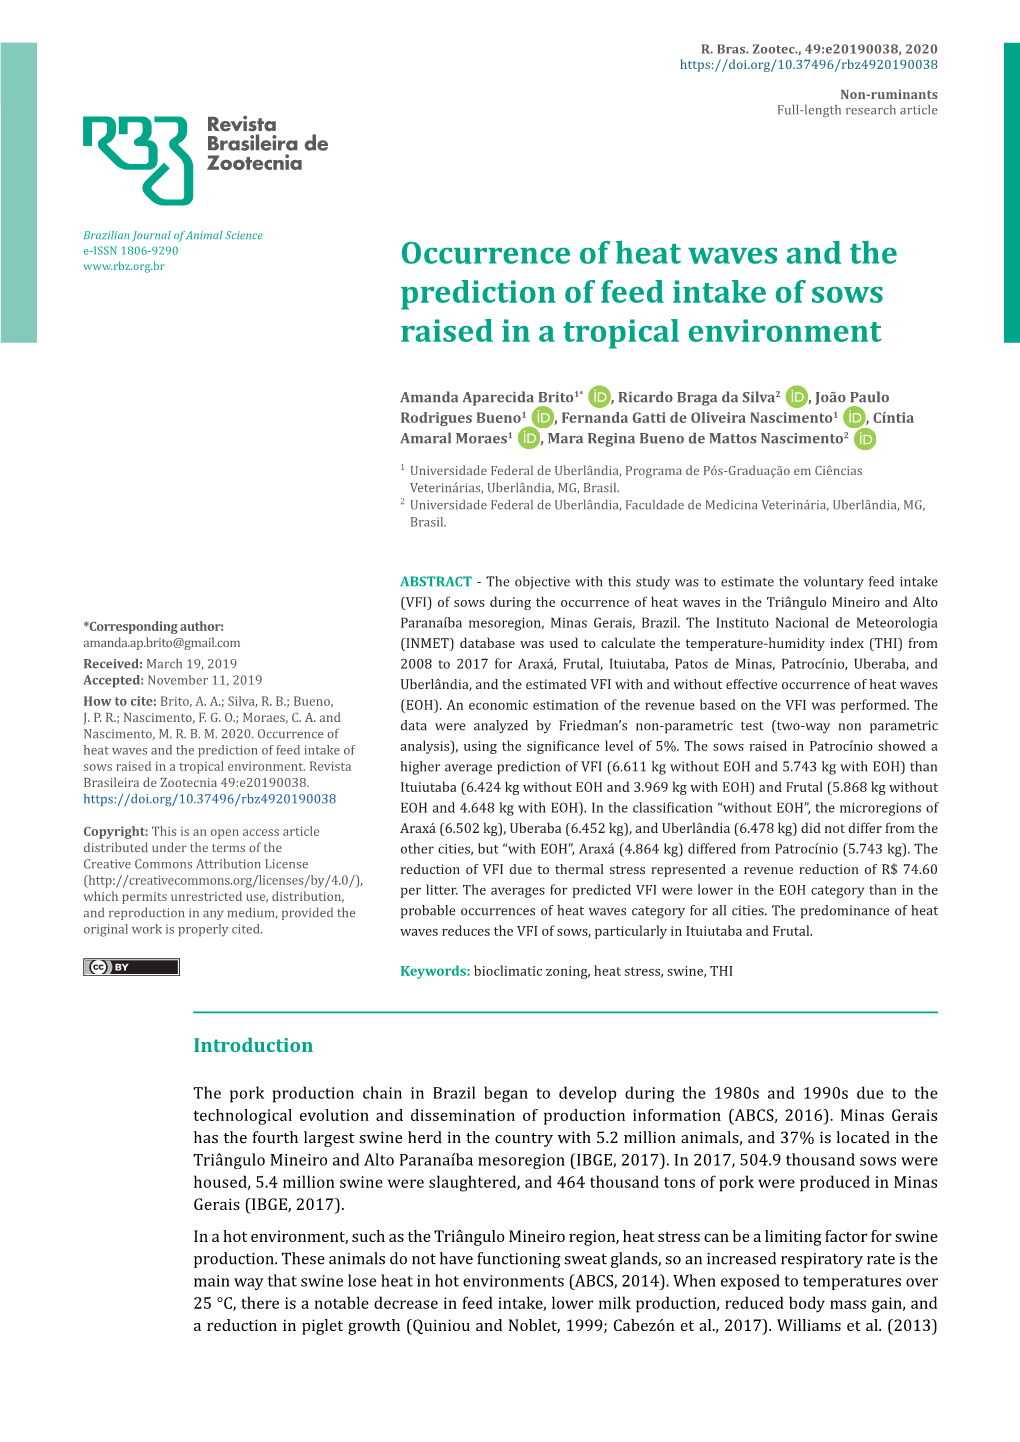 Occurrence of Heat Waves and the Prediction of Feed Intake of Sows Raised in a Tropical Environment